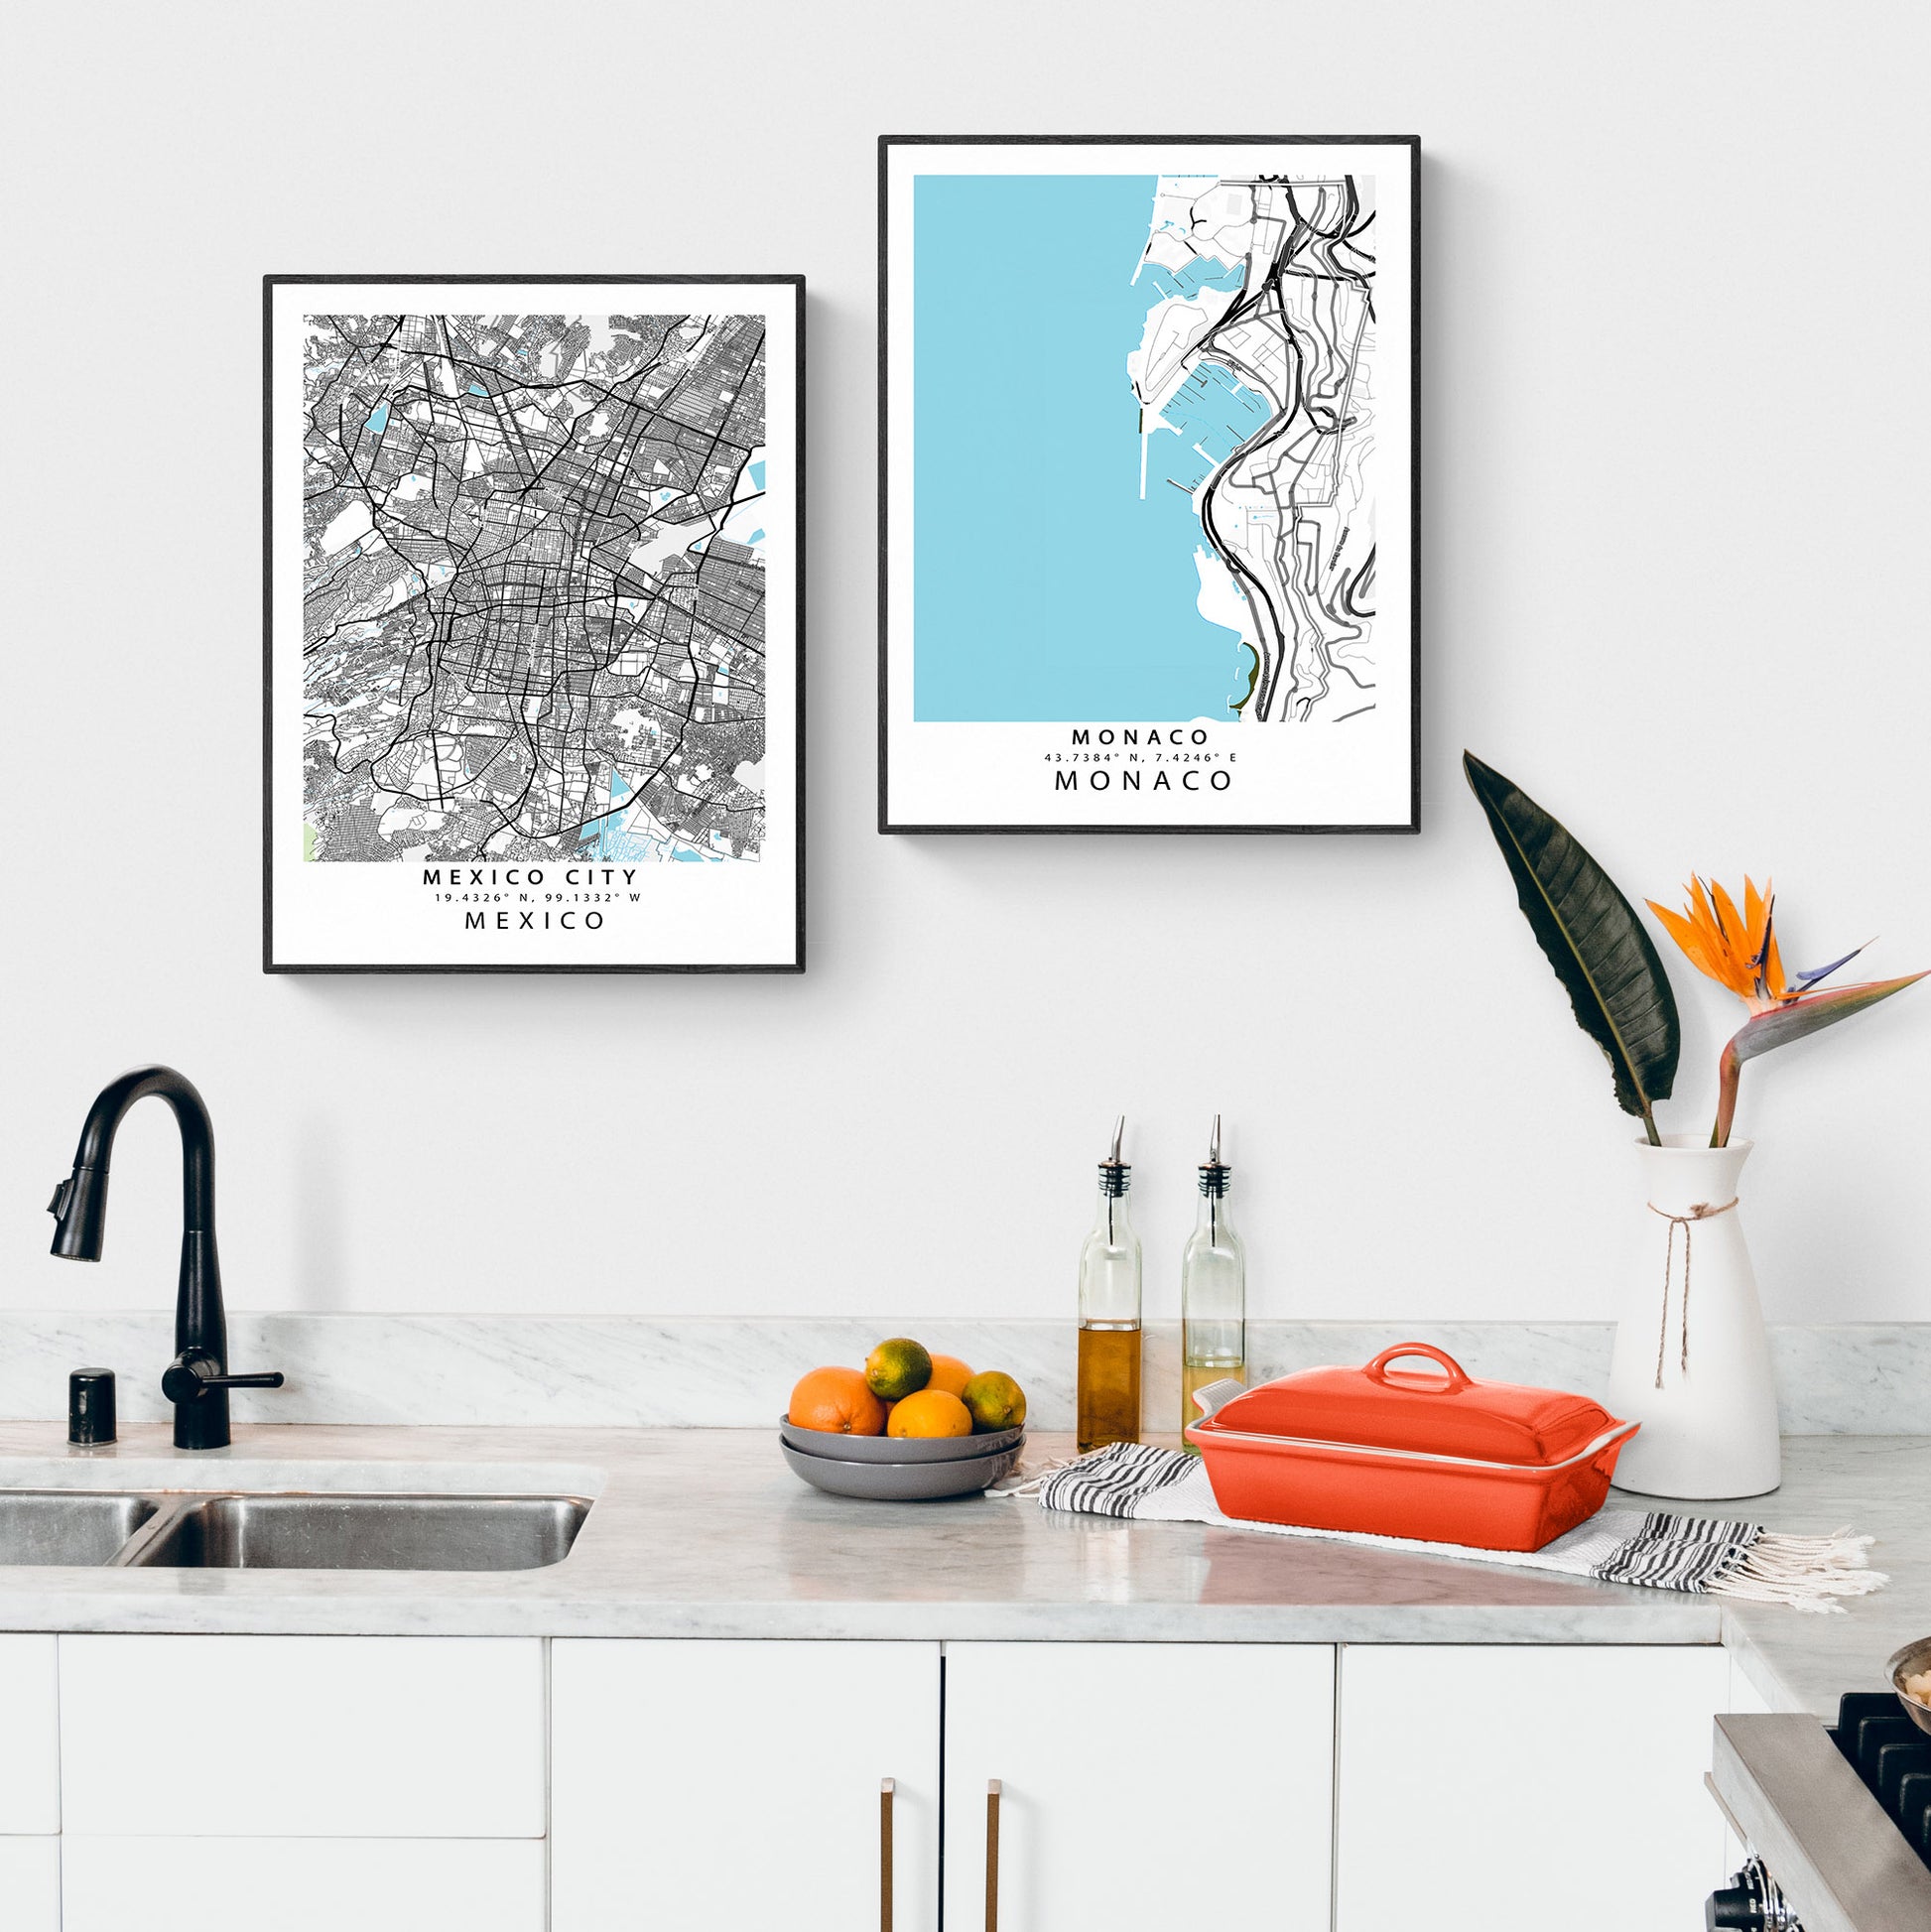 Make your walls a work of art with our Monaco CityStreet Map Posters! A perfect mix of style and sophistication, this custom map art prints poster is exactly what your home needs. Hang this streetmap poster and you'll feel like you're in a different city every day! Get ready for some traveling – without leaving the house!